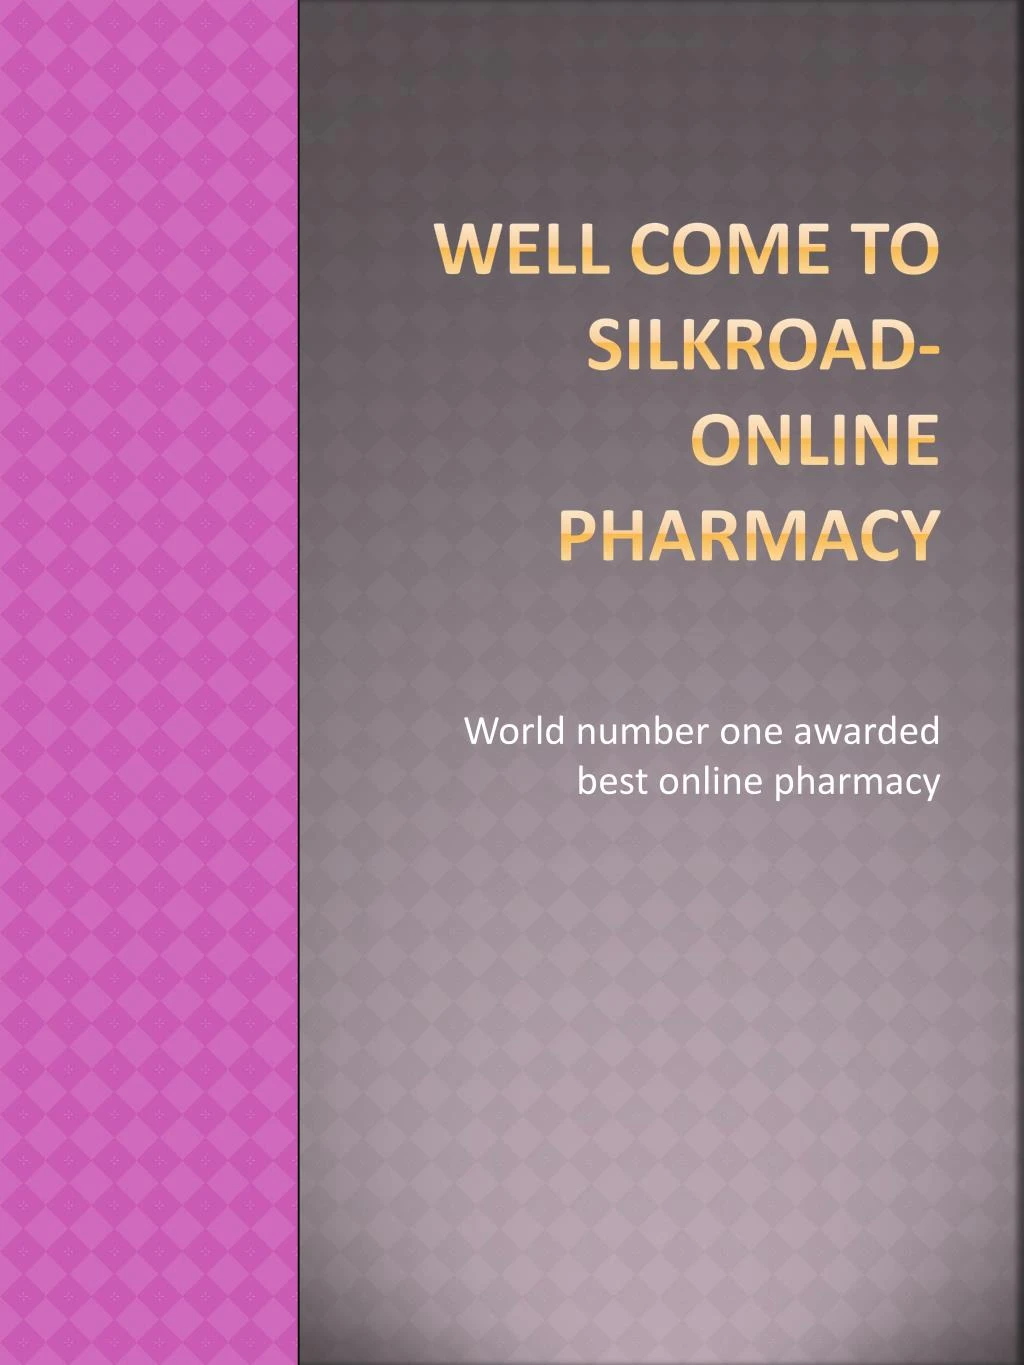 well come to silkroad online pharmacy